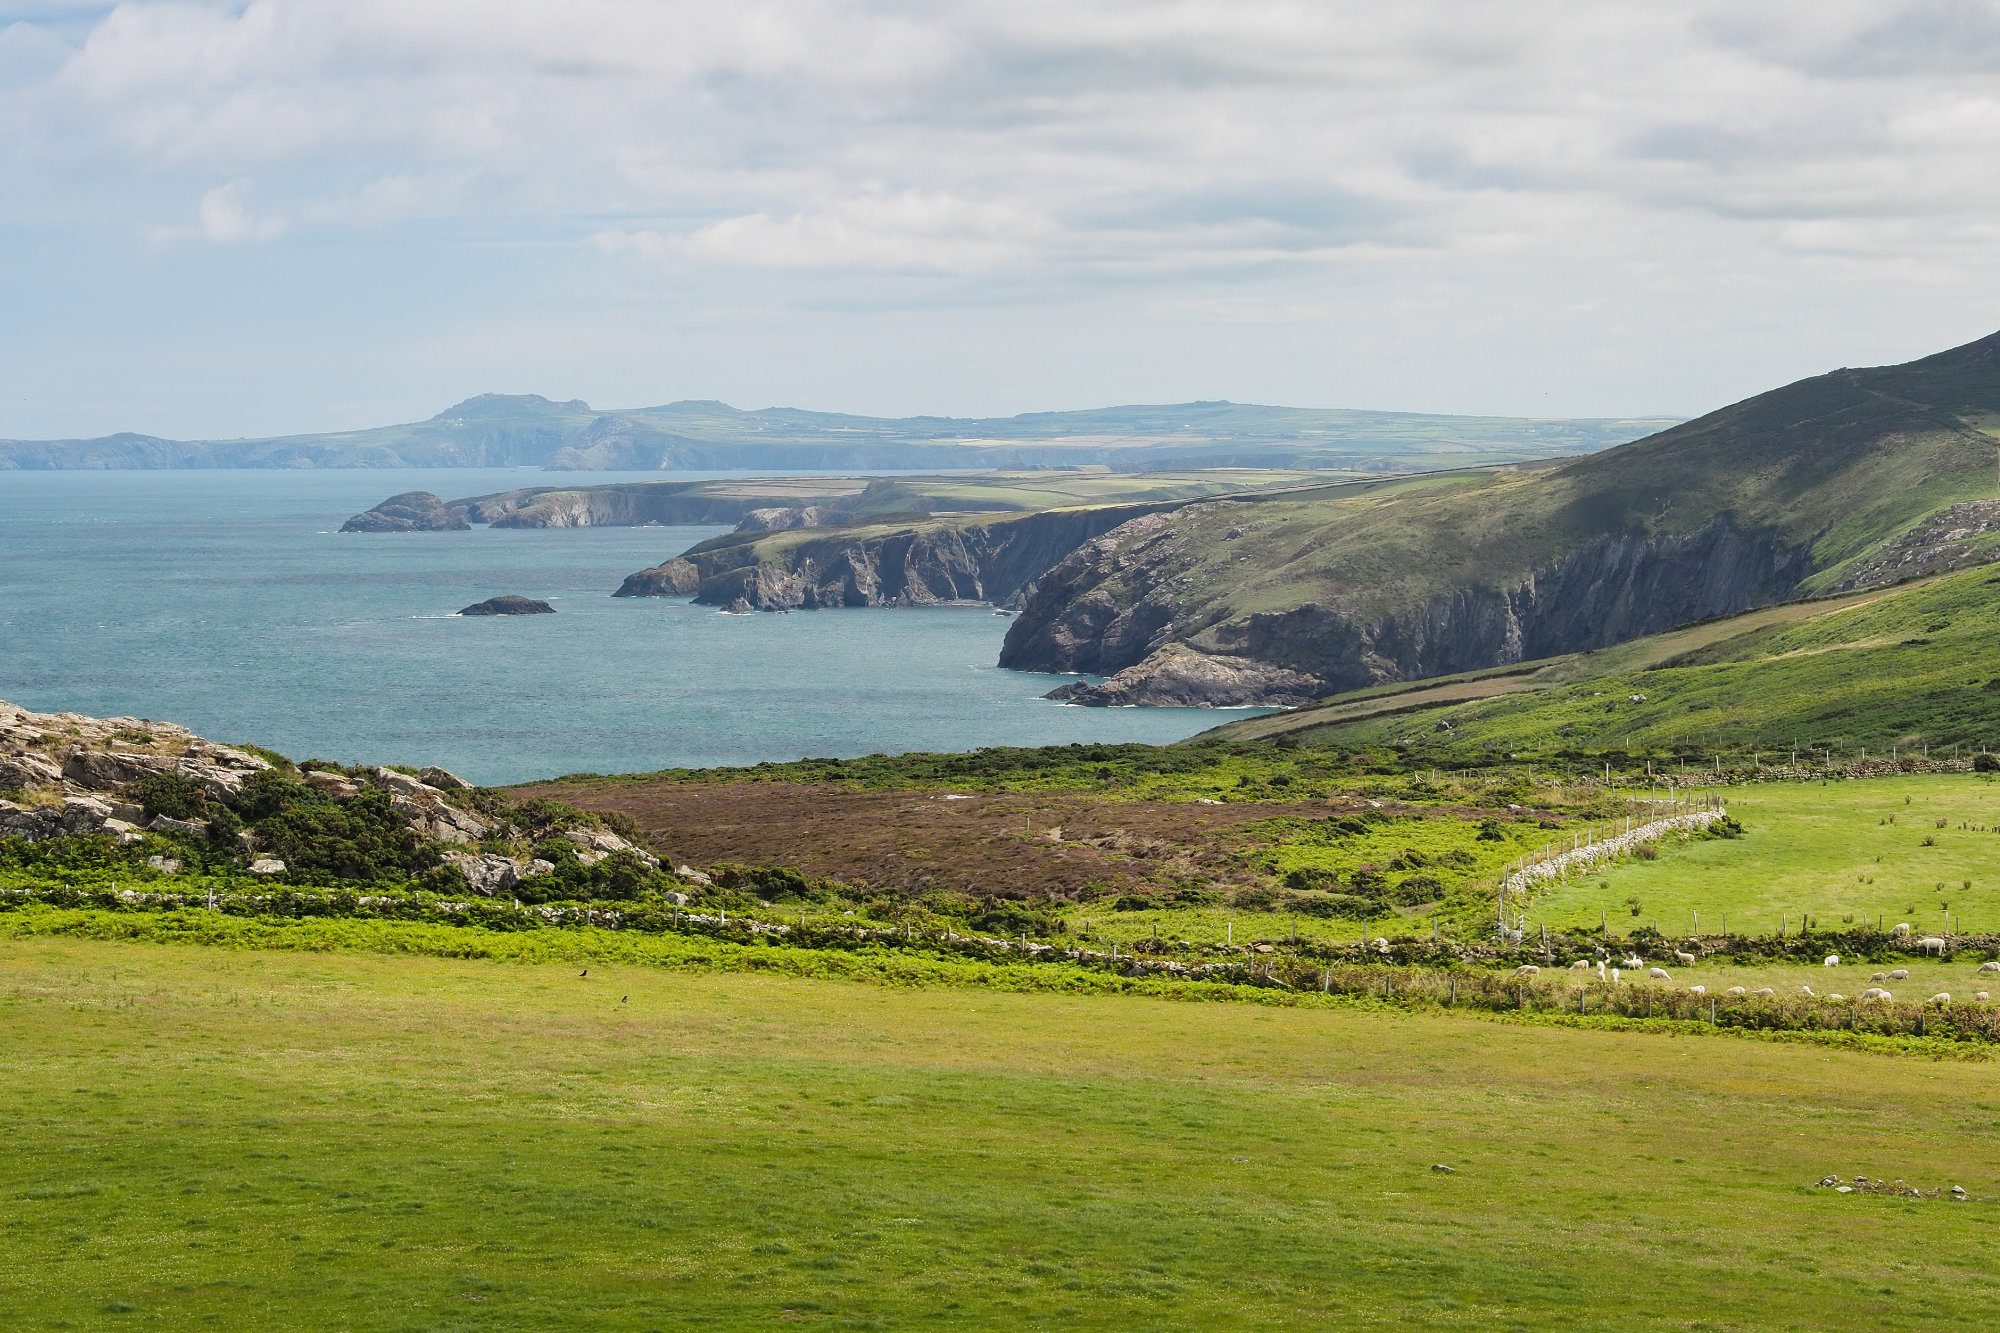 View from the St Davids peninsula of the coves, cliffs and rocky outcrops along the dramatic coastline, Pembrokeshire Coast National Park, Wales, UK